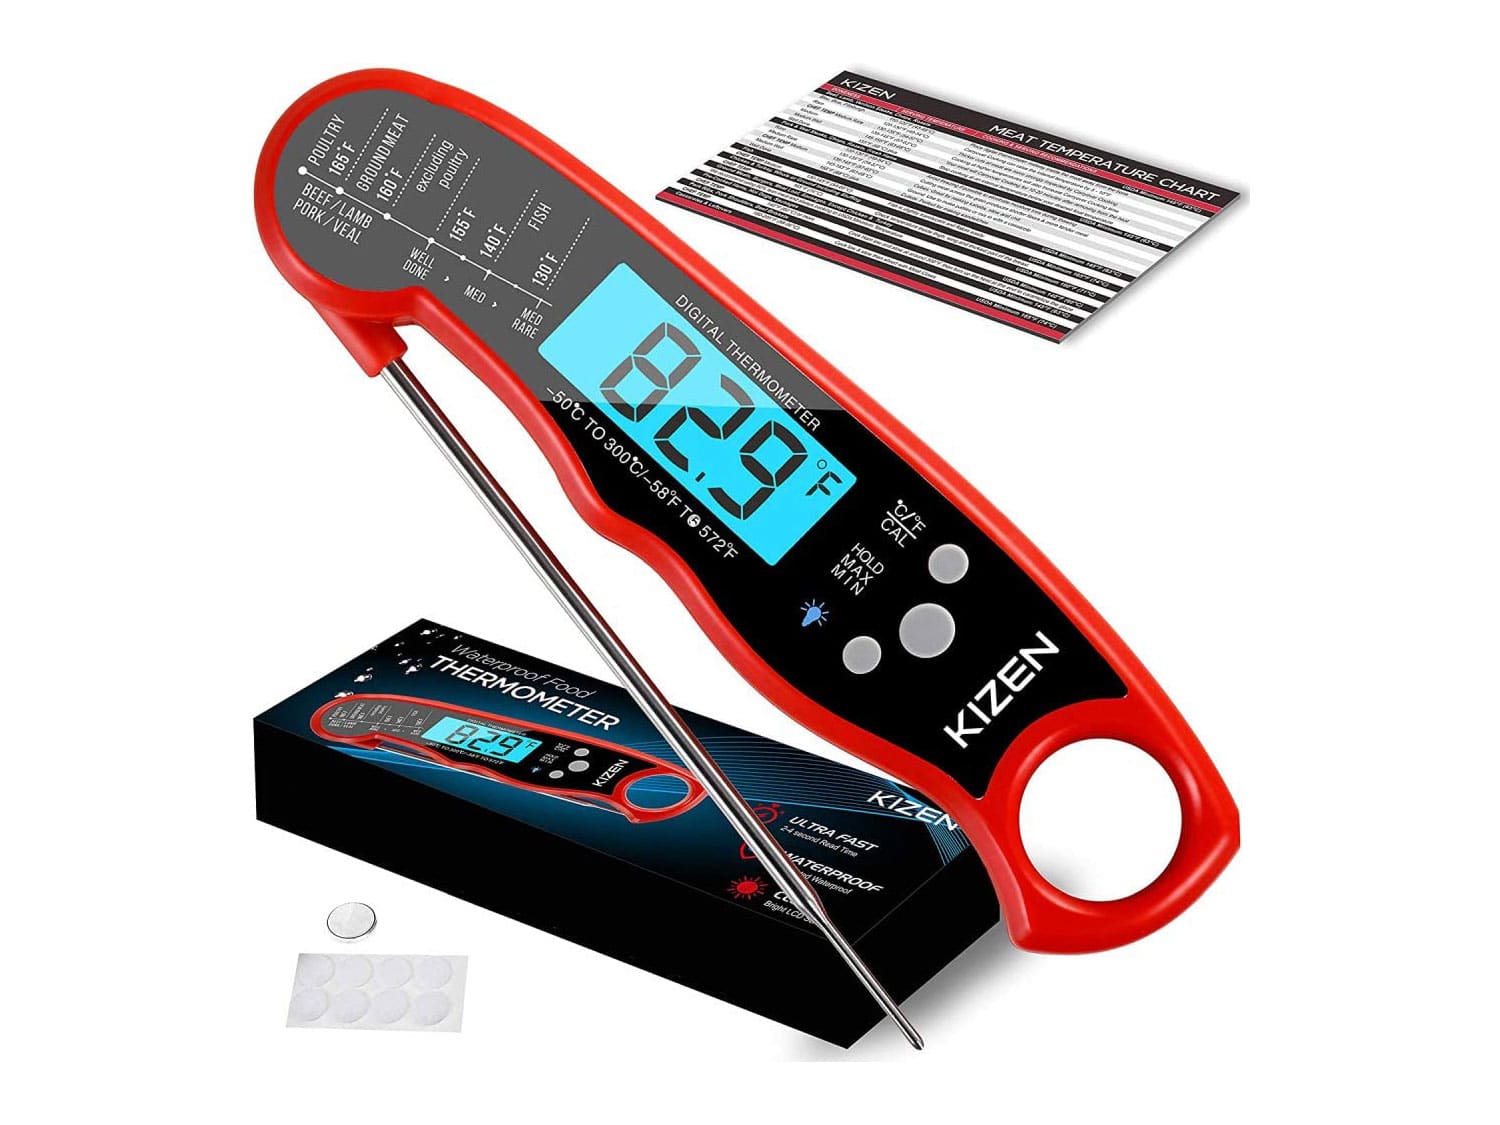 Kizen Digital Meat Thermometers for Cooking - Waterproof Instant Read Food Thermometer for Meat, Deep Frying, Baking, Outdoor Cooking, Grilling, & BBQ (Red/Black)